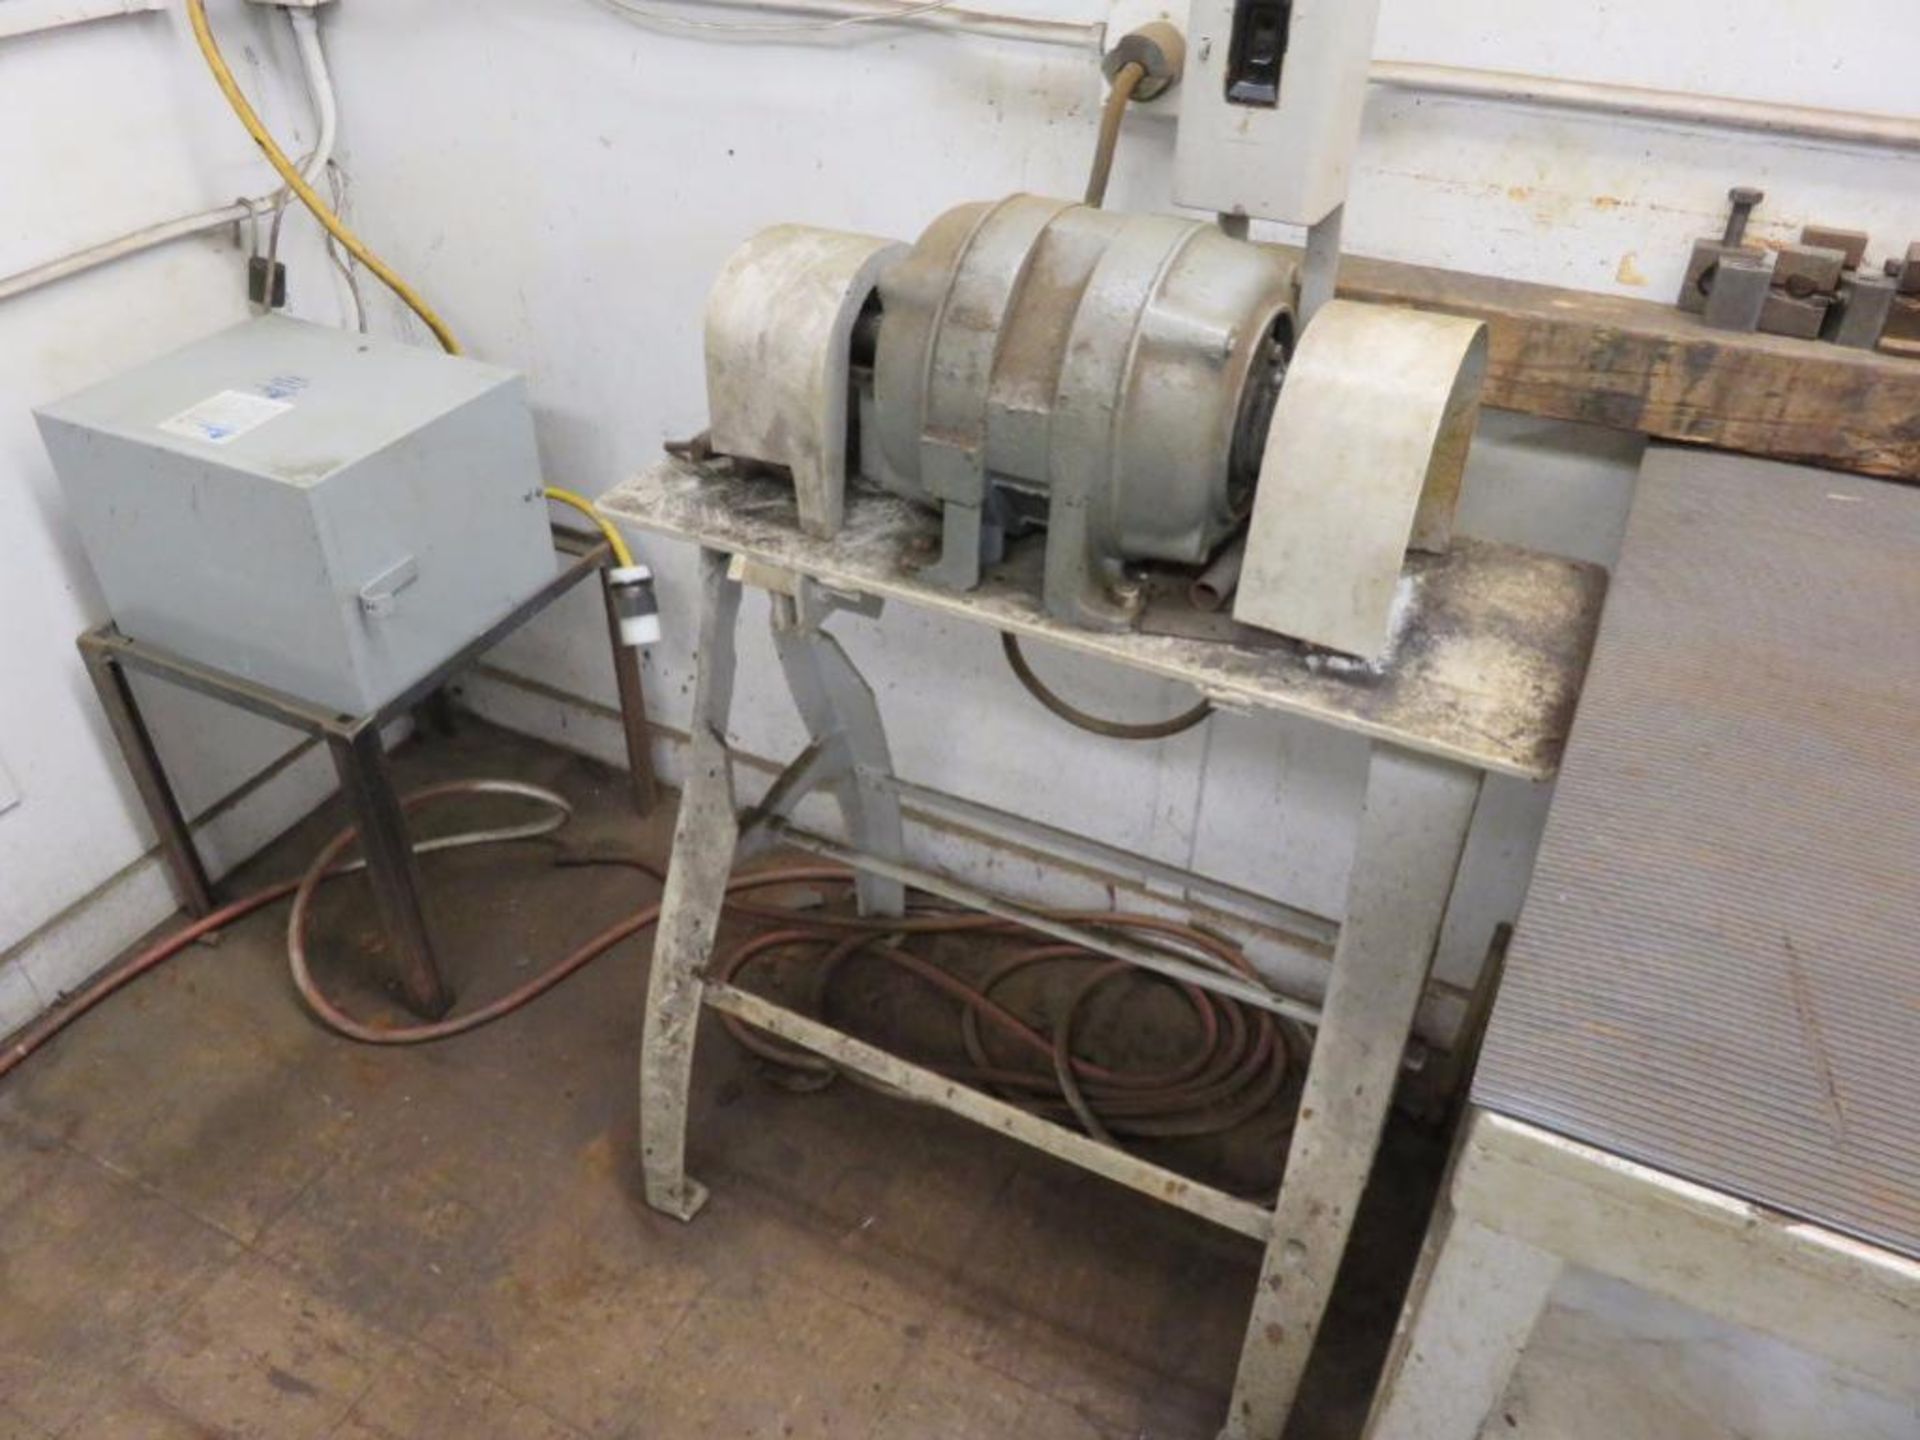 LOT: (1) 6 in. Belt Sander Mounted on Dust Collector, (1) Custom Double End Polishing Stand, (1) Lan - Image 2 of 2